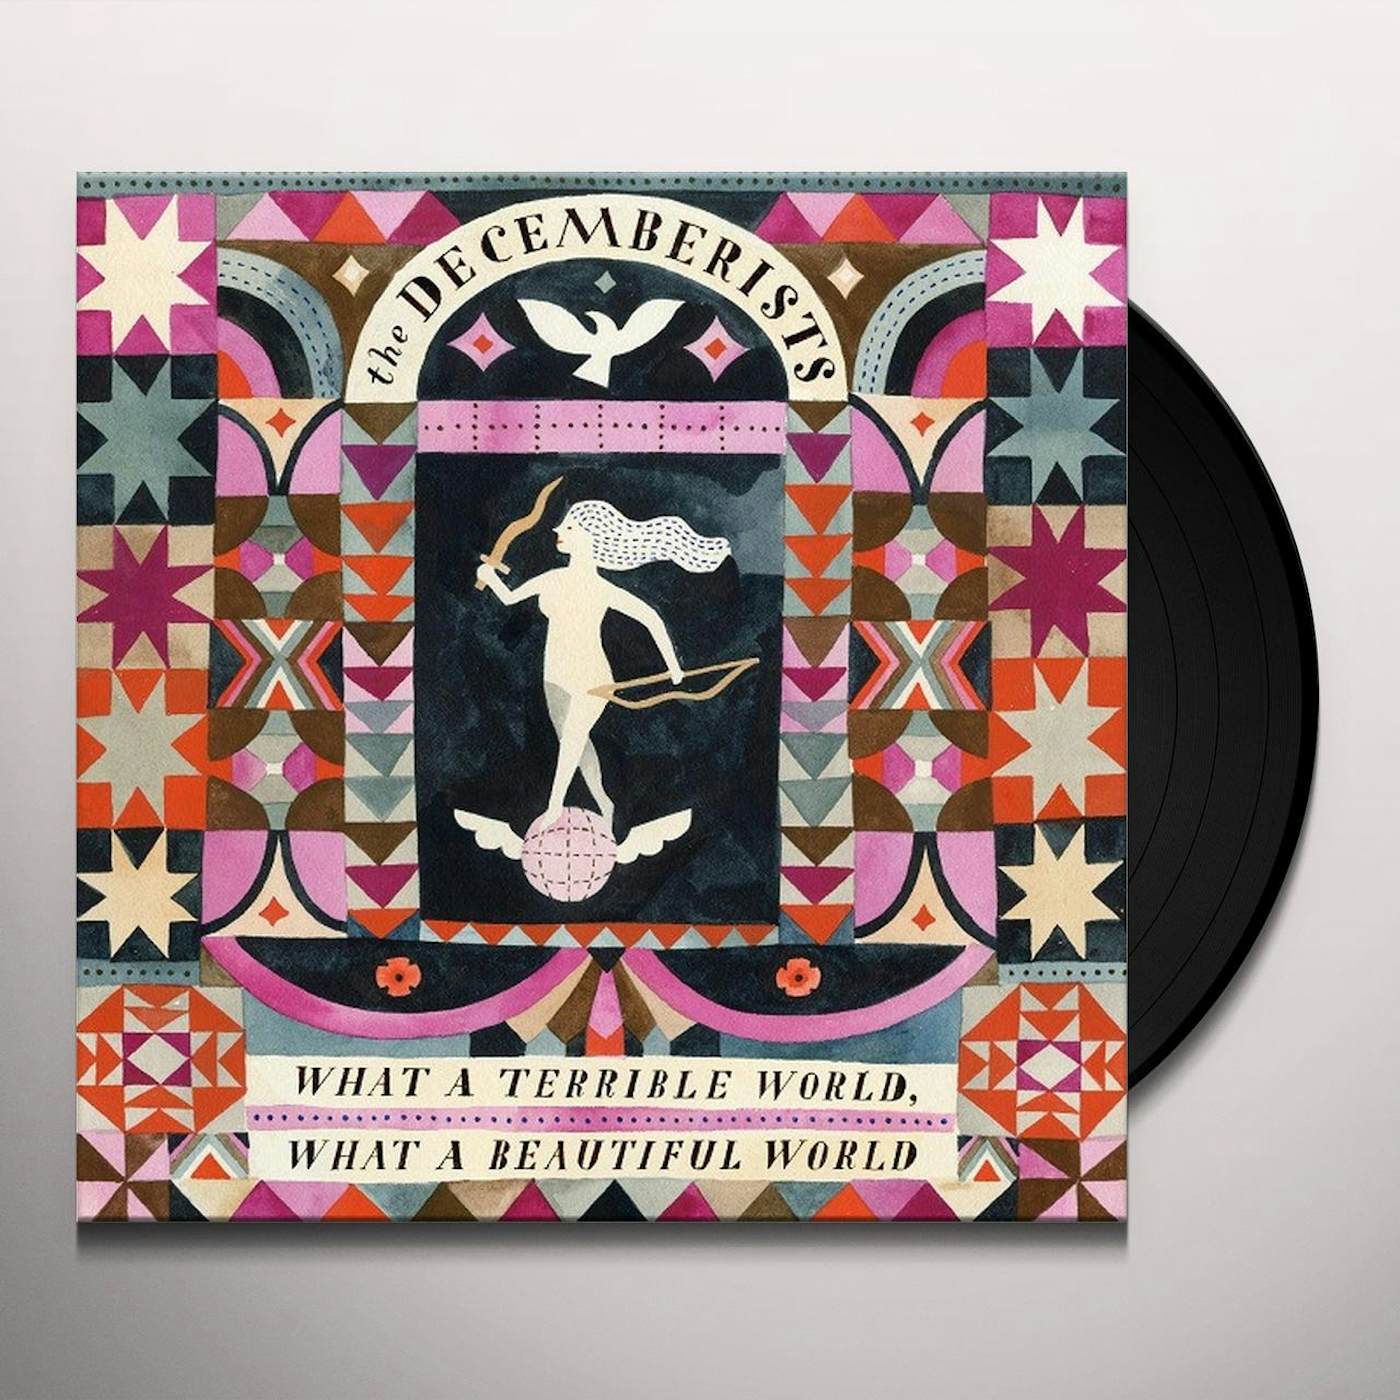 The Decemberists WHAT A TERRIBLE WORLD: WHAT A BEAUTIFUL WORLD Vinyl Record